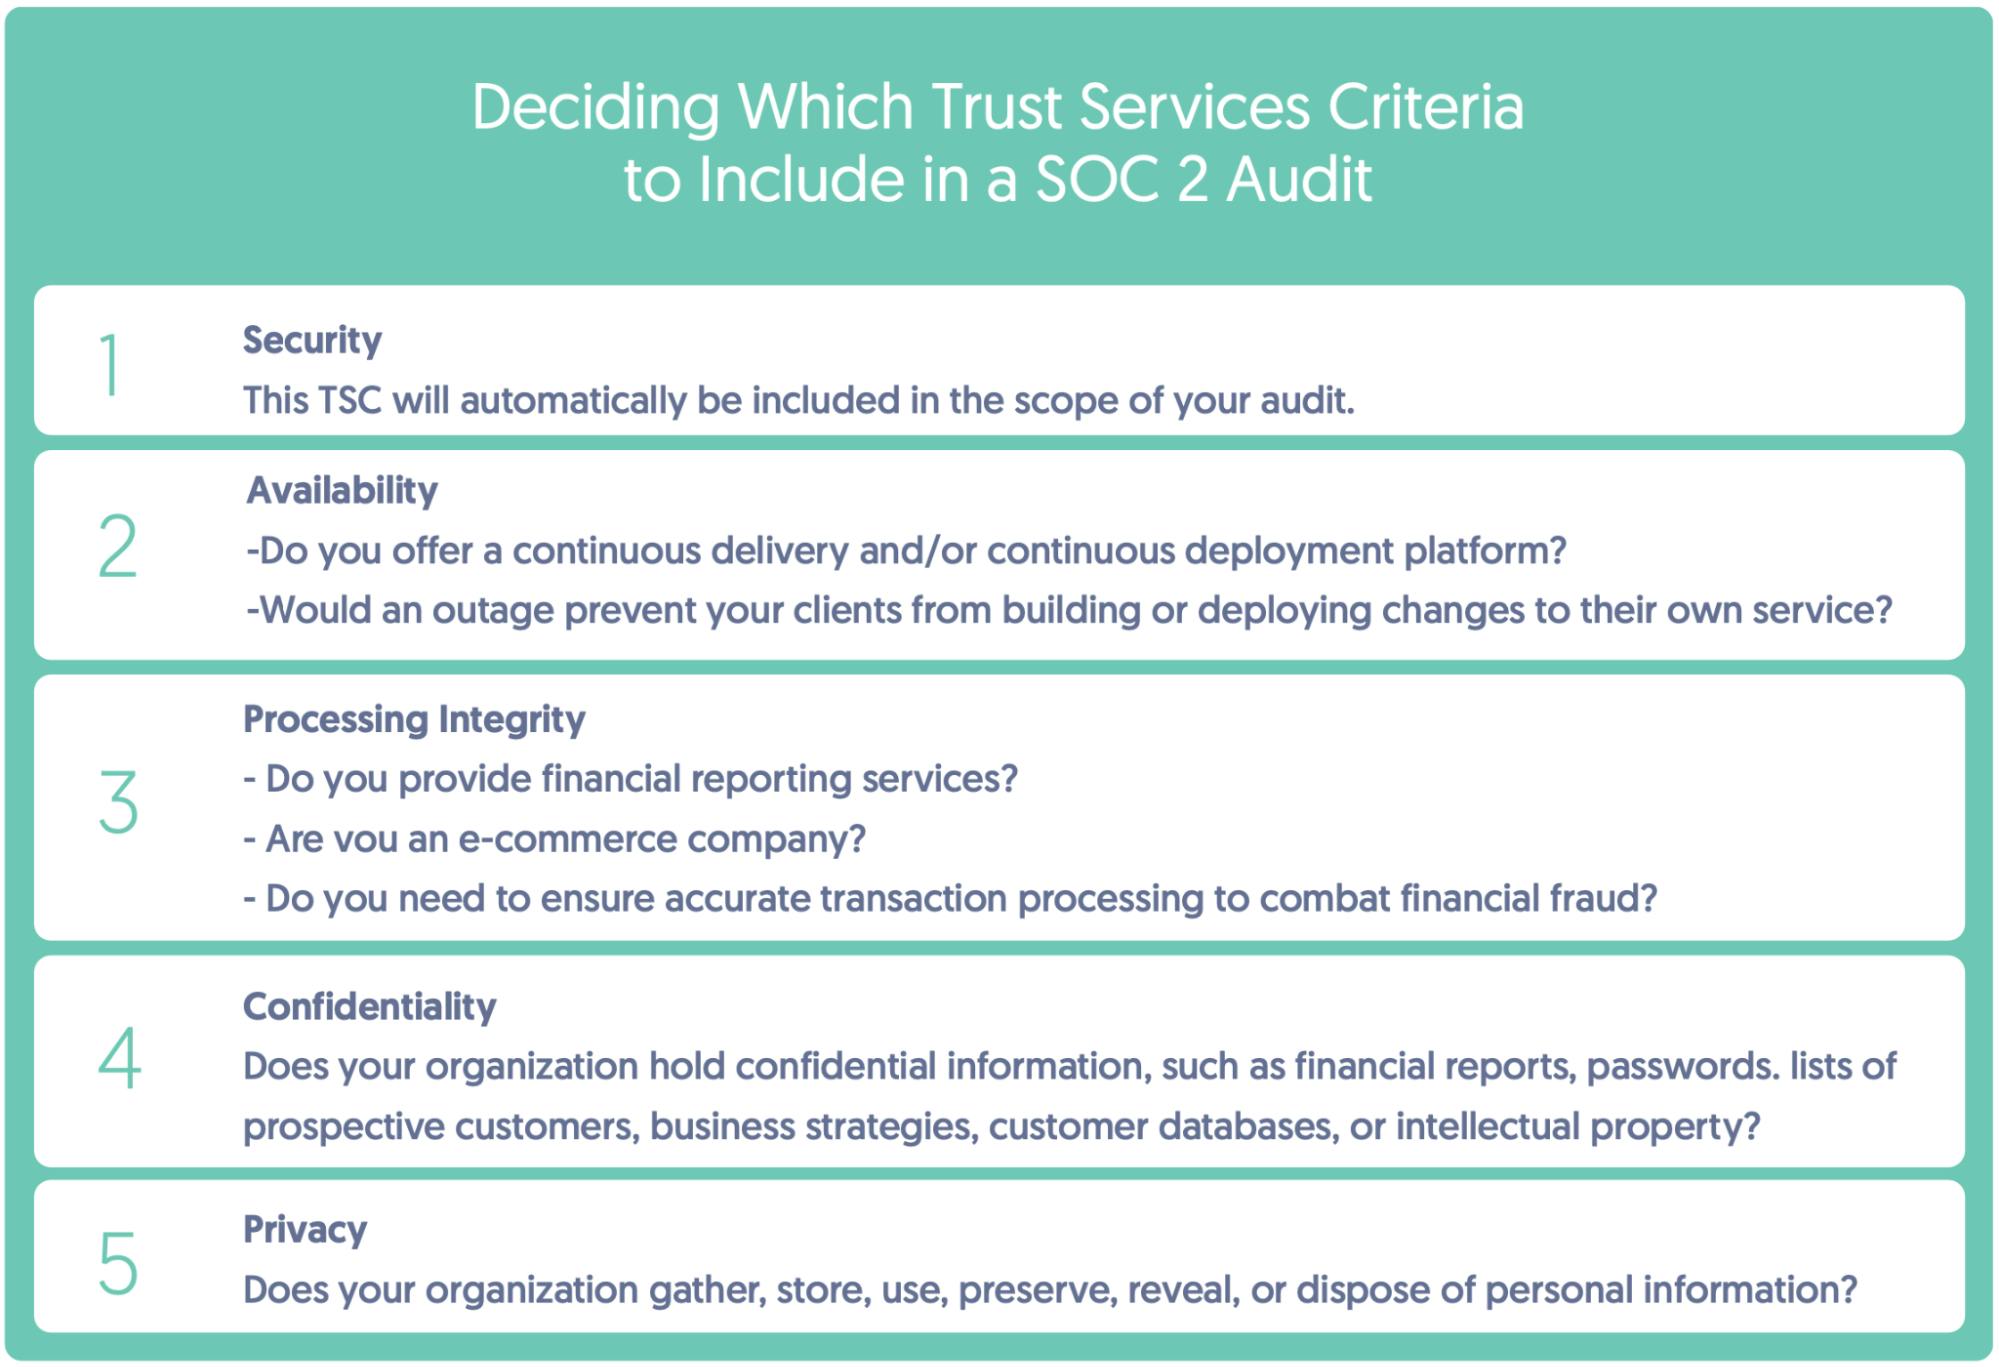 Questions to determine which Trust Services Criteria to include in a SOC 2 audit